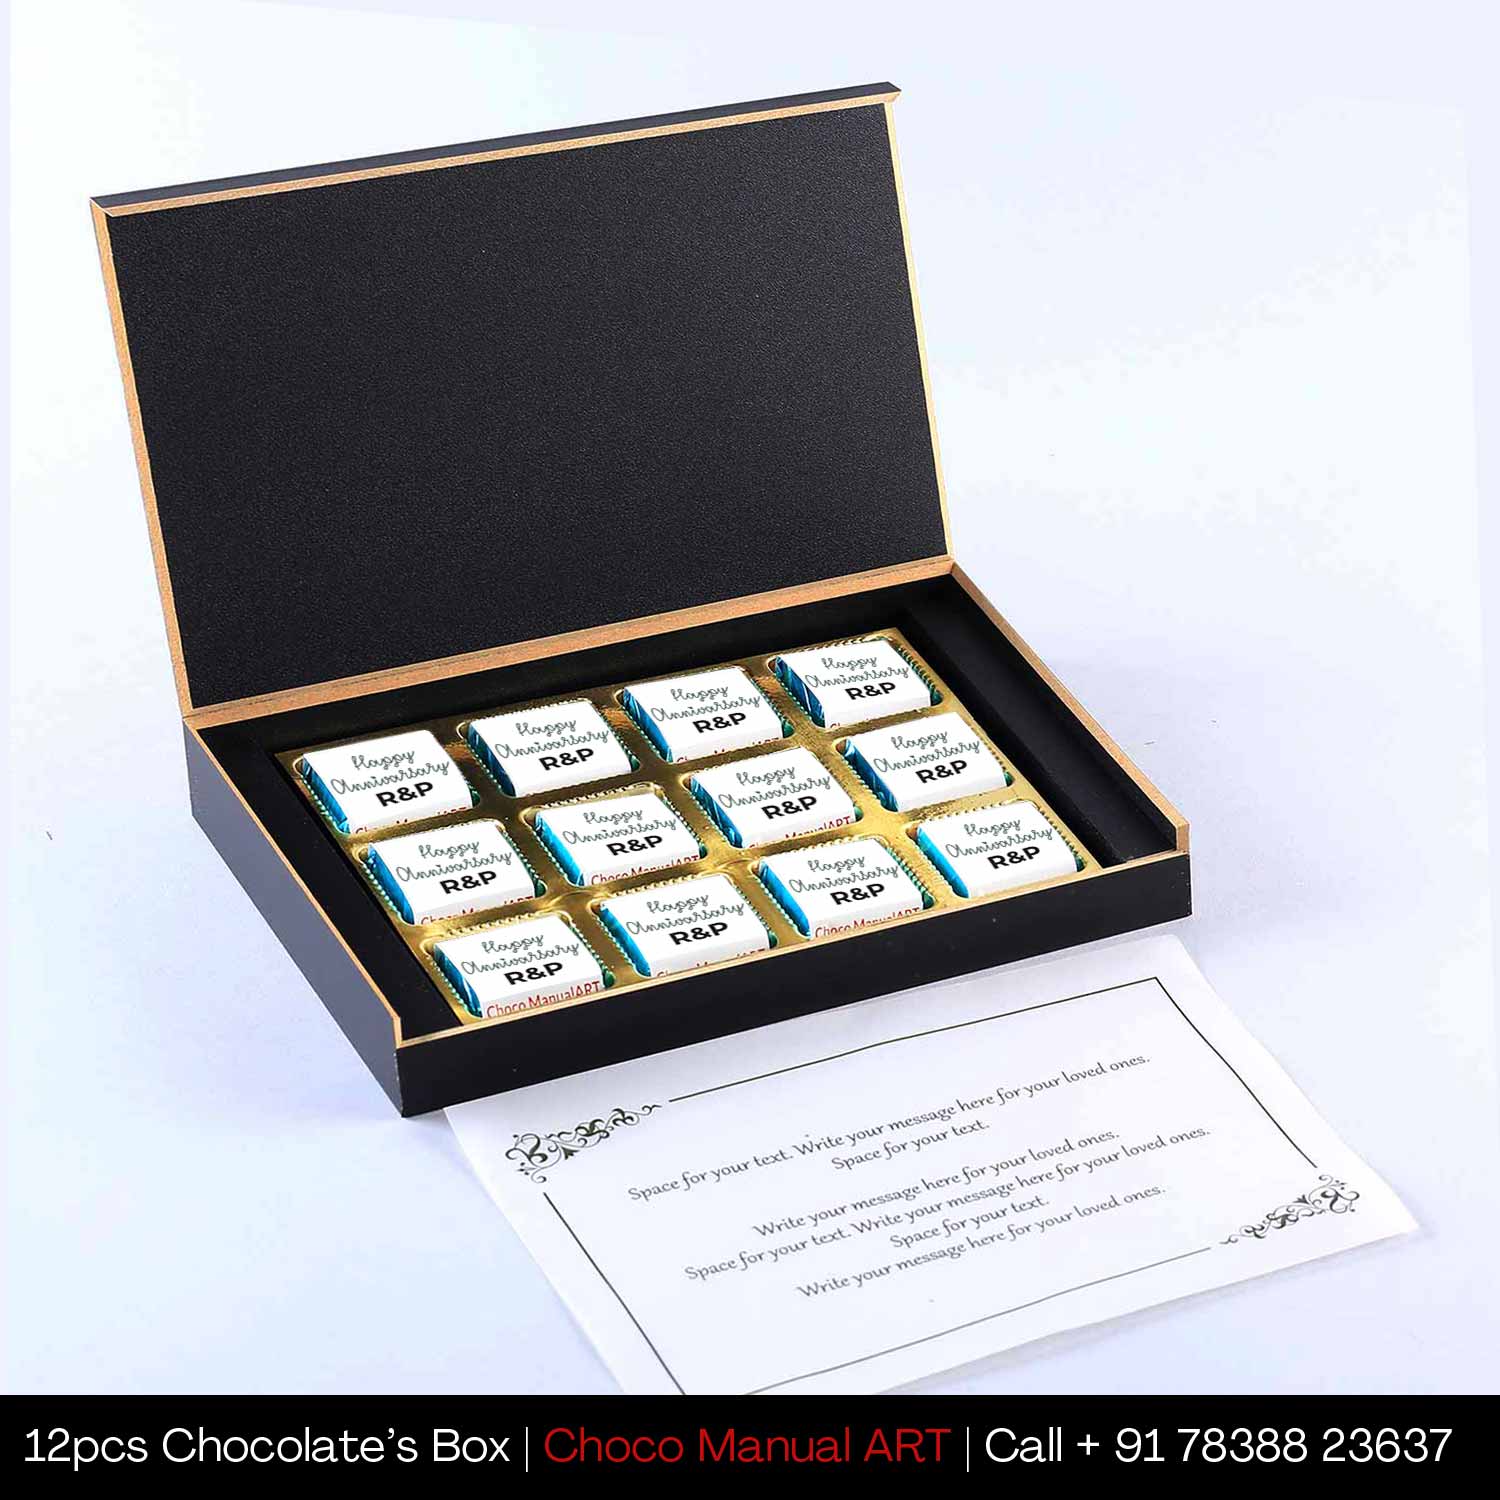 Buy Personalised gifts I Order online for Customised chocolate gift box For Your Wedding Anniversary